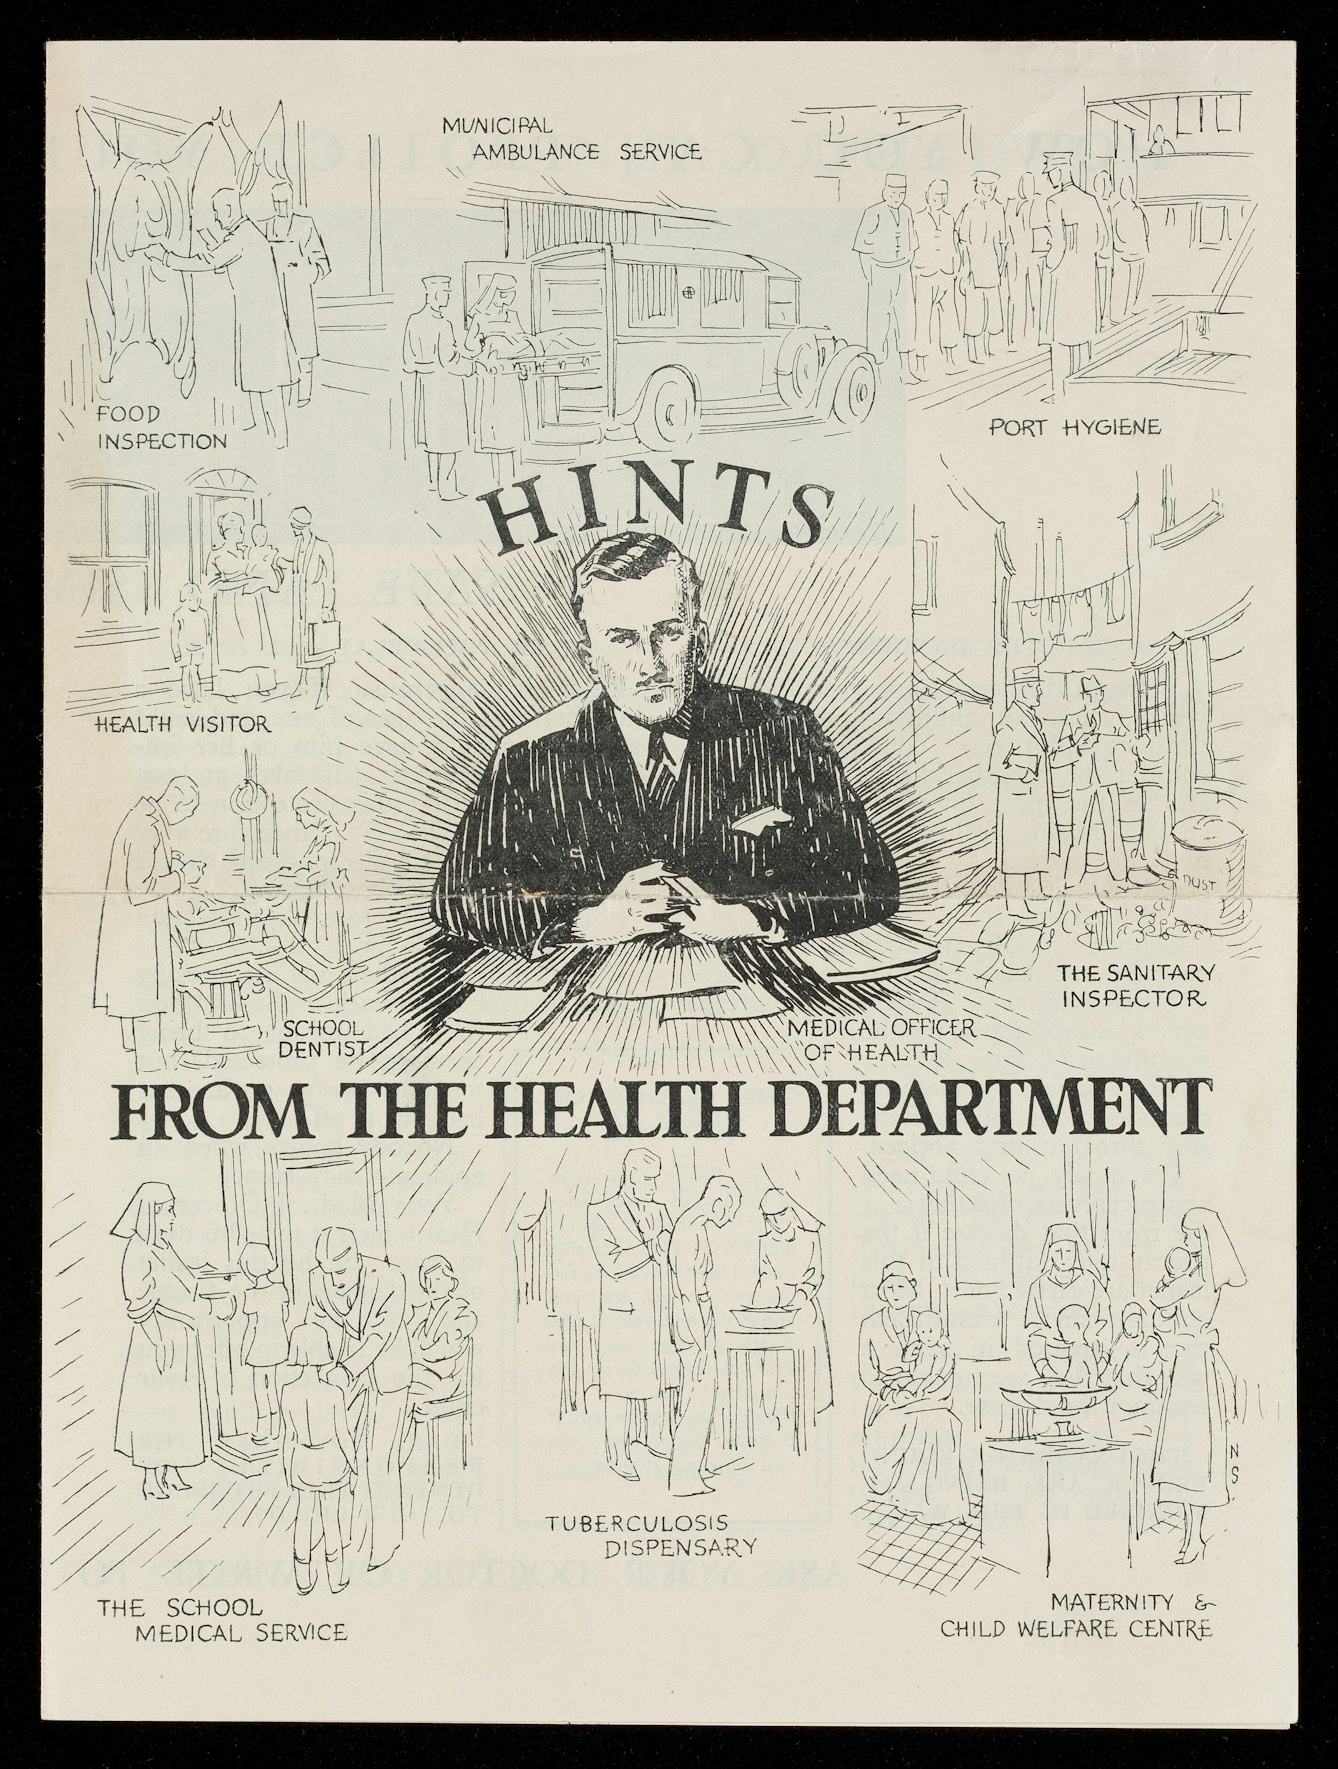 Front page of a leaflet showing a moustachioed and suited Medical Officer of Health in the centre, with the title "Hints from the Health Department" above and below him. Around the rest of the page are images of the various local provisions that the Officer oversaw, such as food inspection, tuberculosis dispensary, municipal ambulance service, and school dentist. 